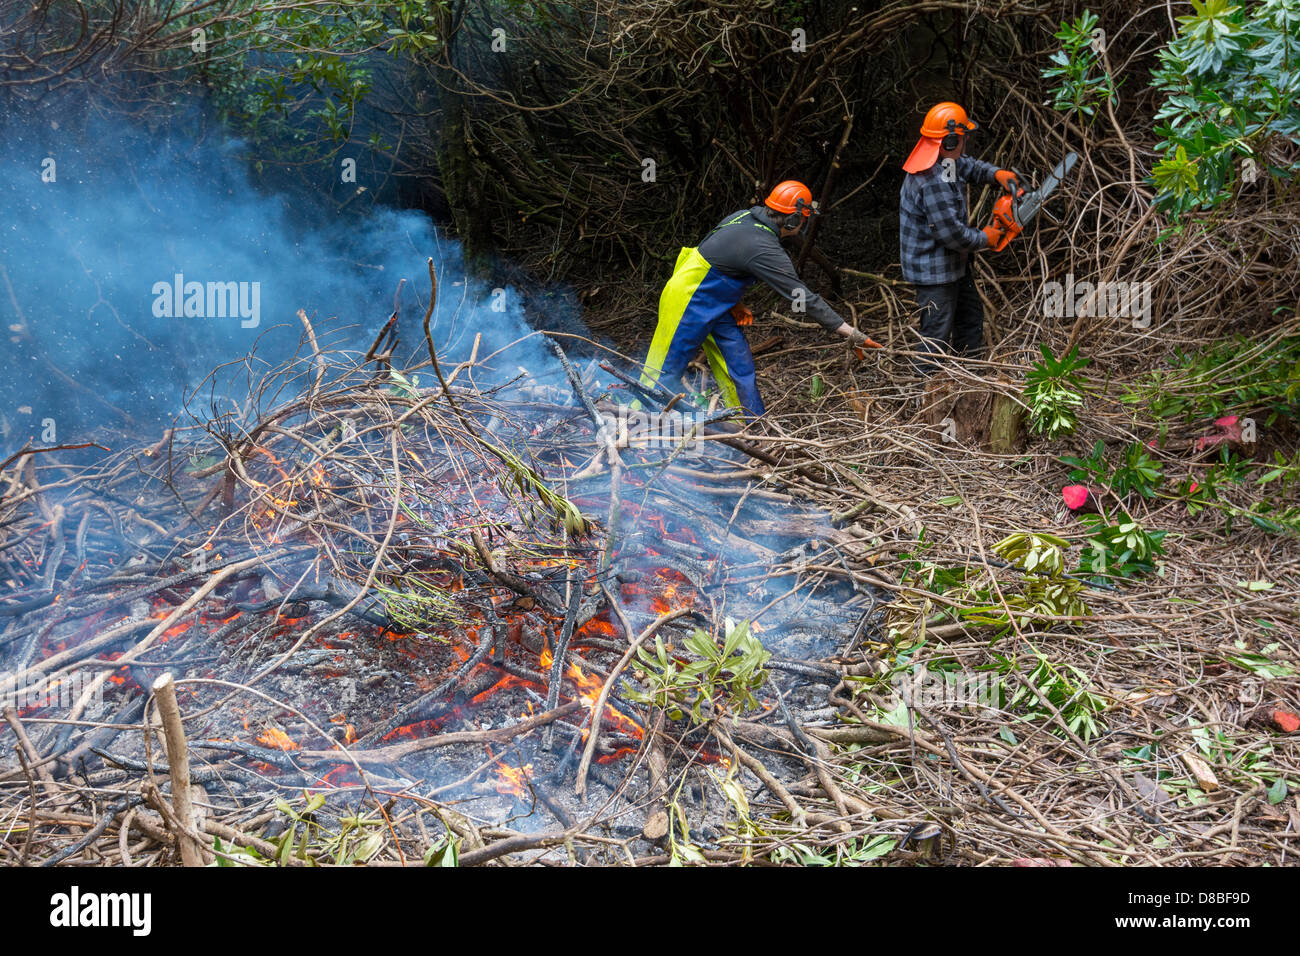 Scottish forestry workers controlling Rhododendron invasion by cutting and burning. Stock Photo